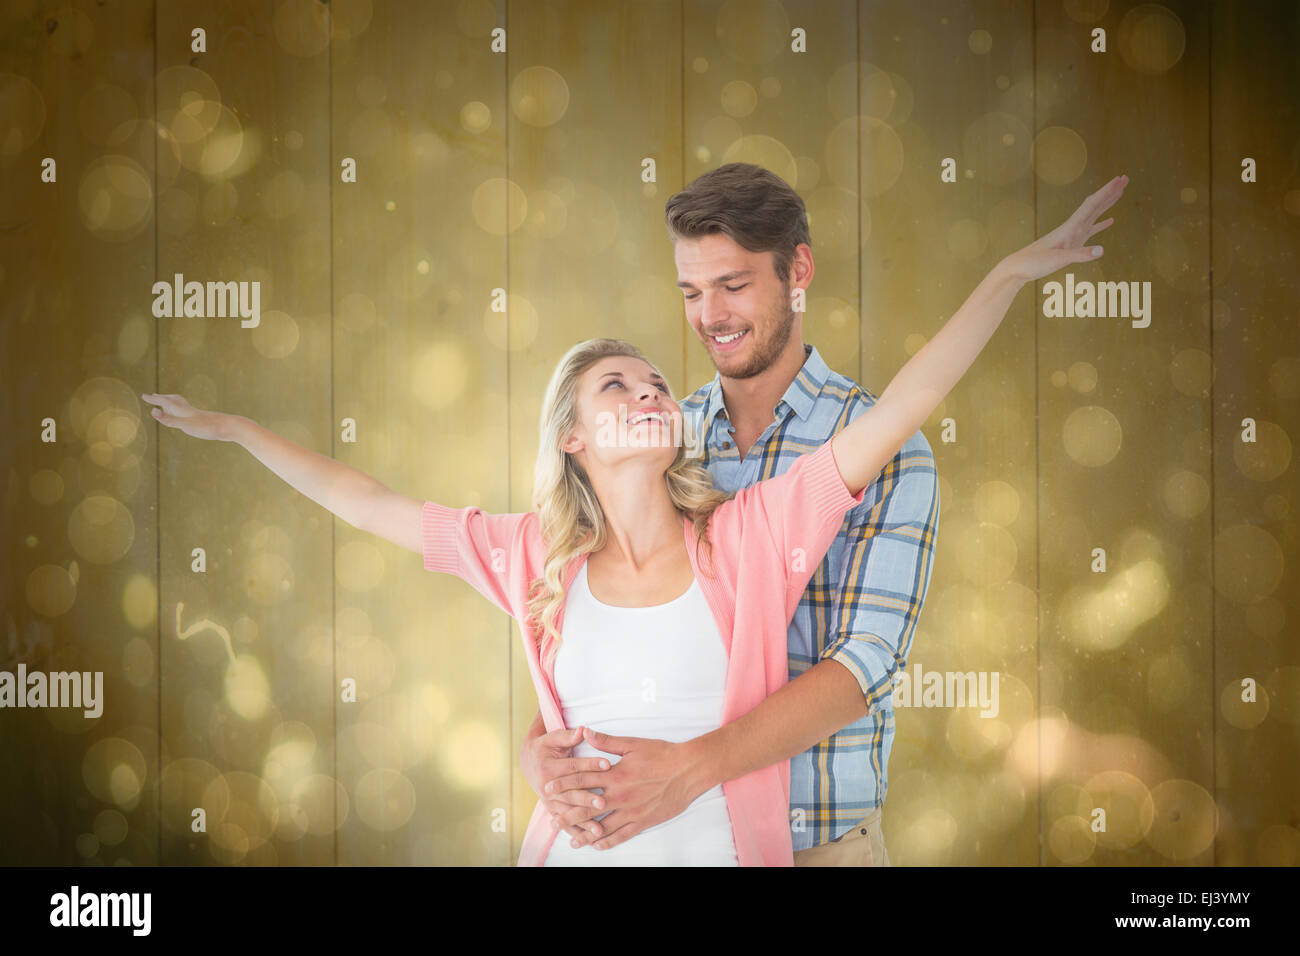 Composite image of attractive young couple smiling and embracing Stock Photo